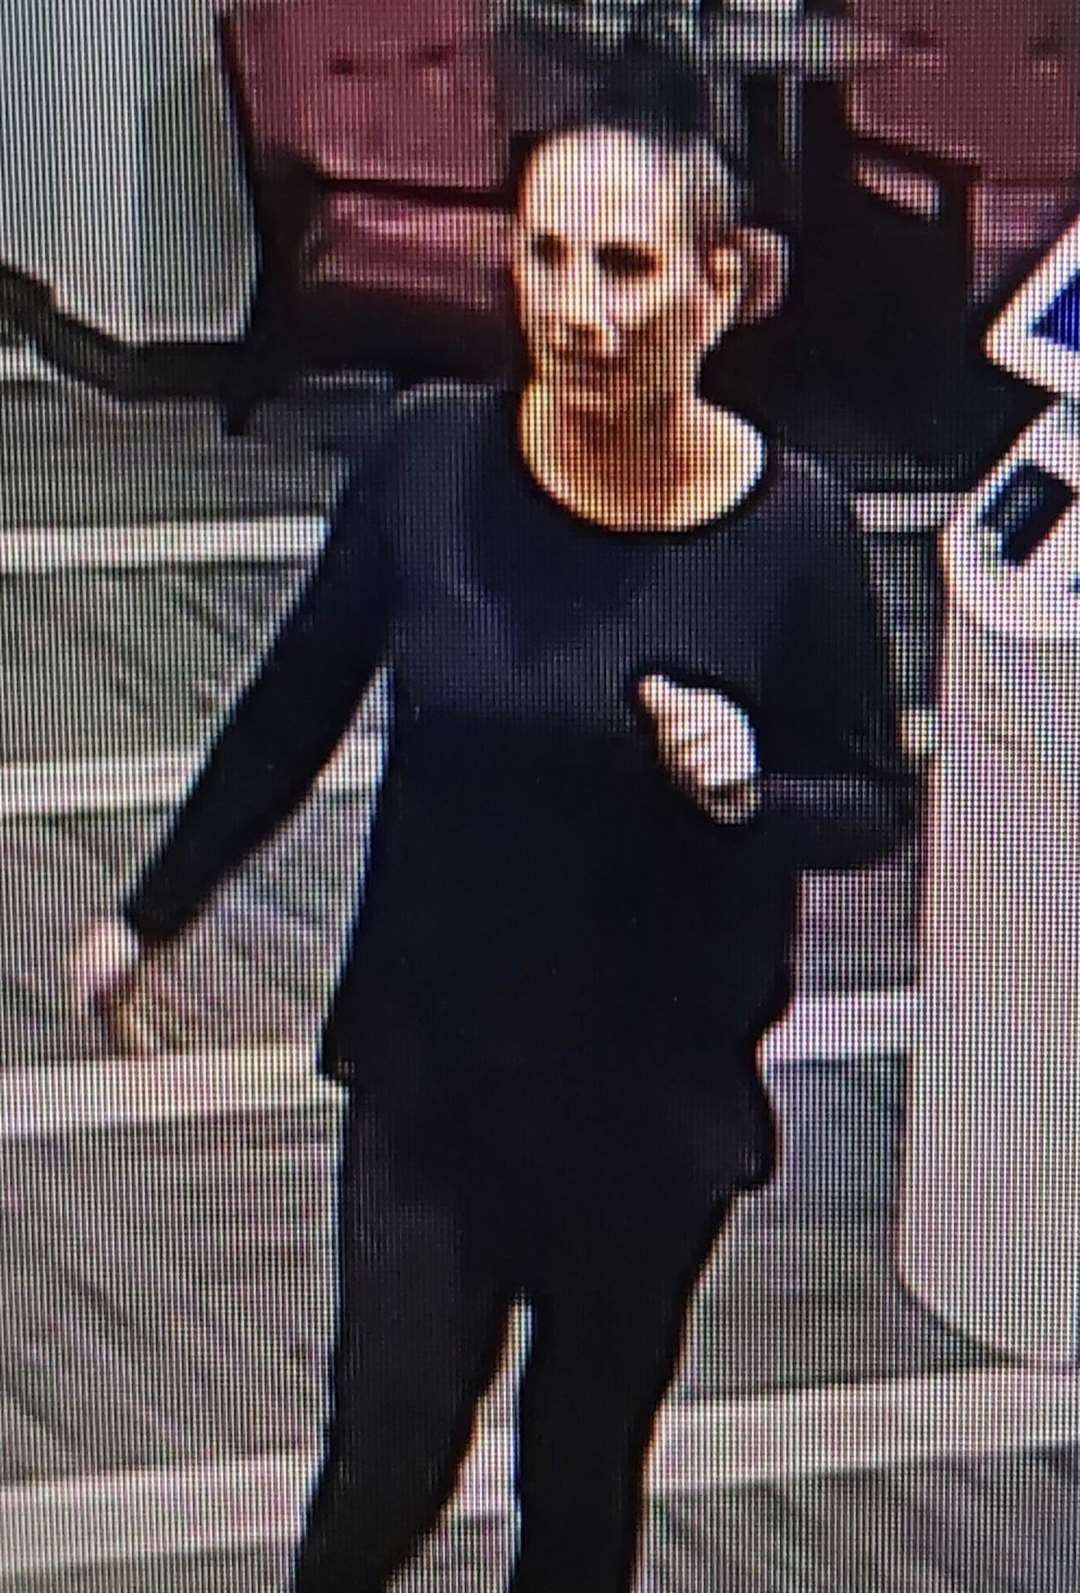 Police have released a CCTV image of a woman they’d like to speak to, following reports of a hate crime at the Premier Inn in Tattenhall Way, Faversham. Picture: Kent Police